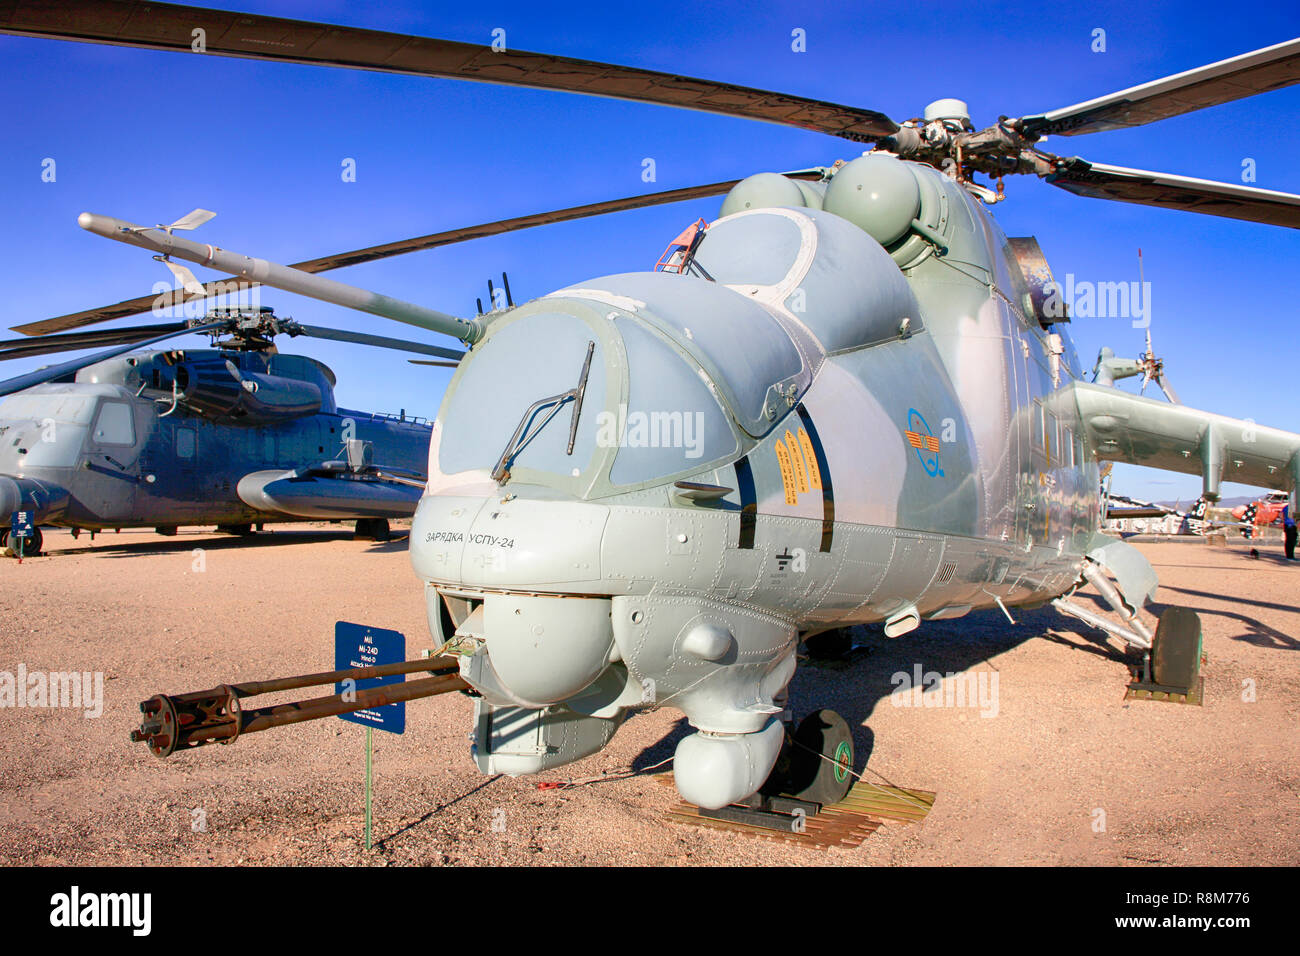 Soviet Mil Mi-24D helicopter gunship on display at the Pima Air & Space Museum in Tucson, AZ Stock Photo